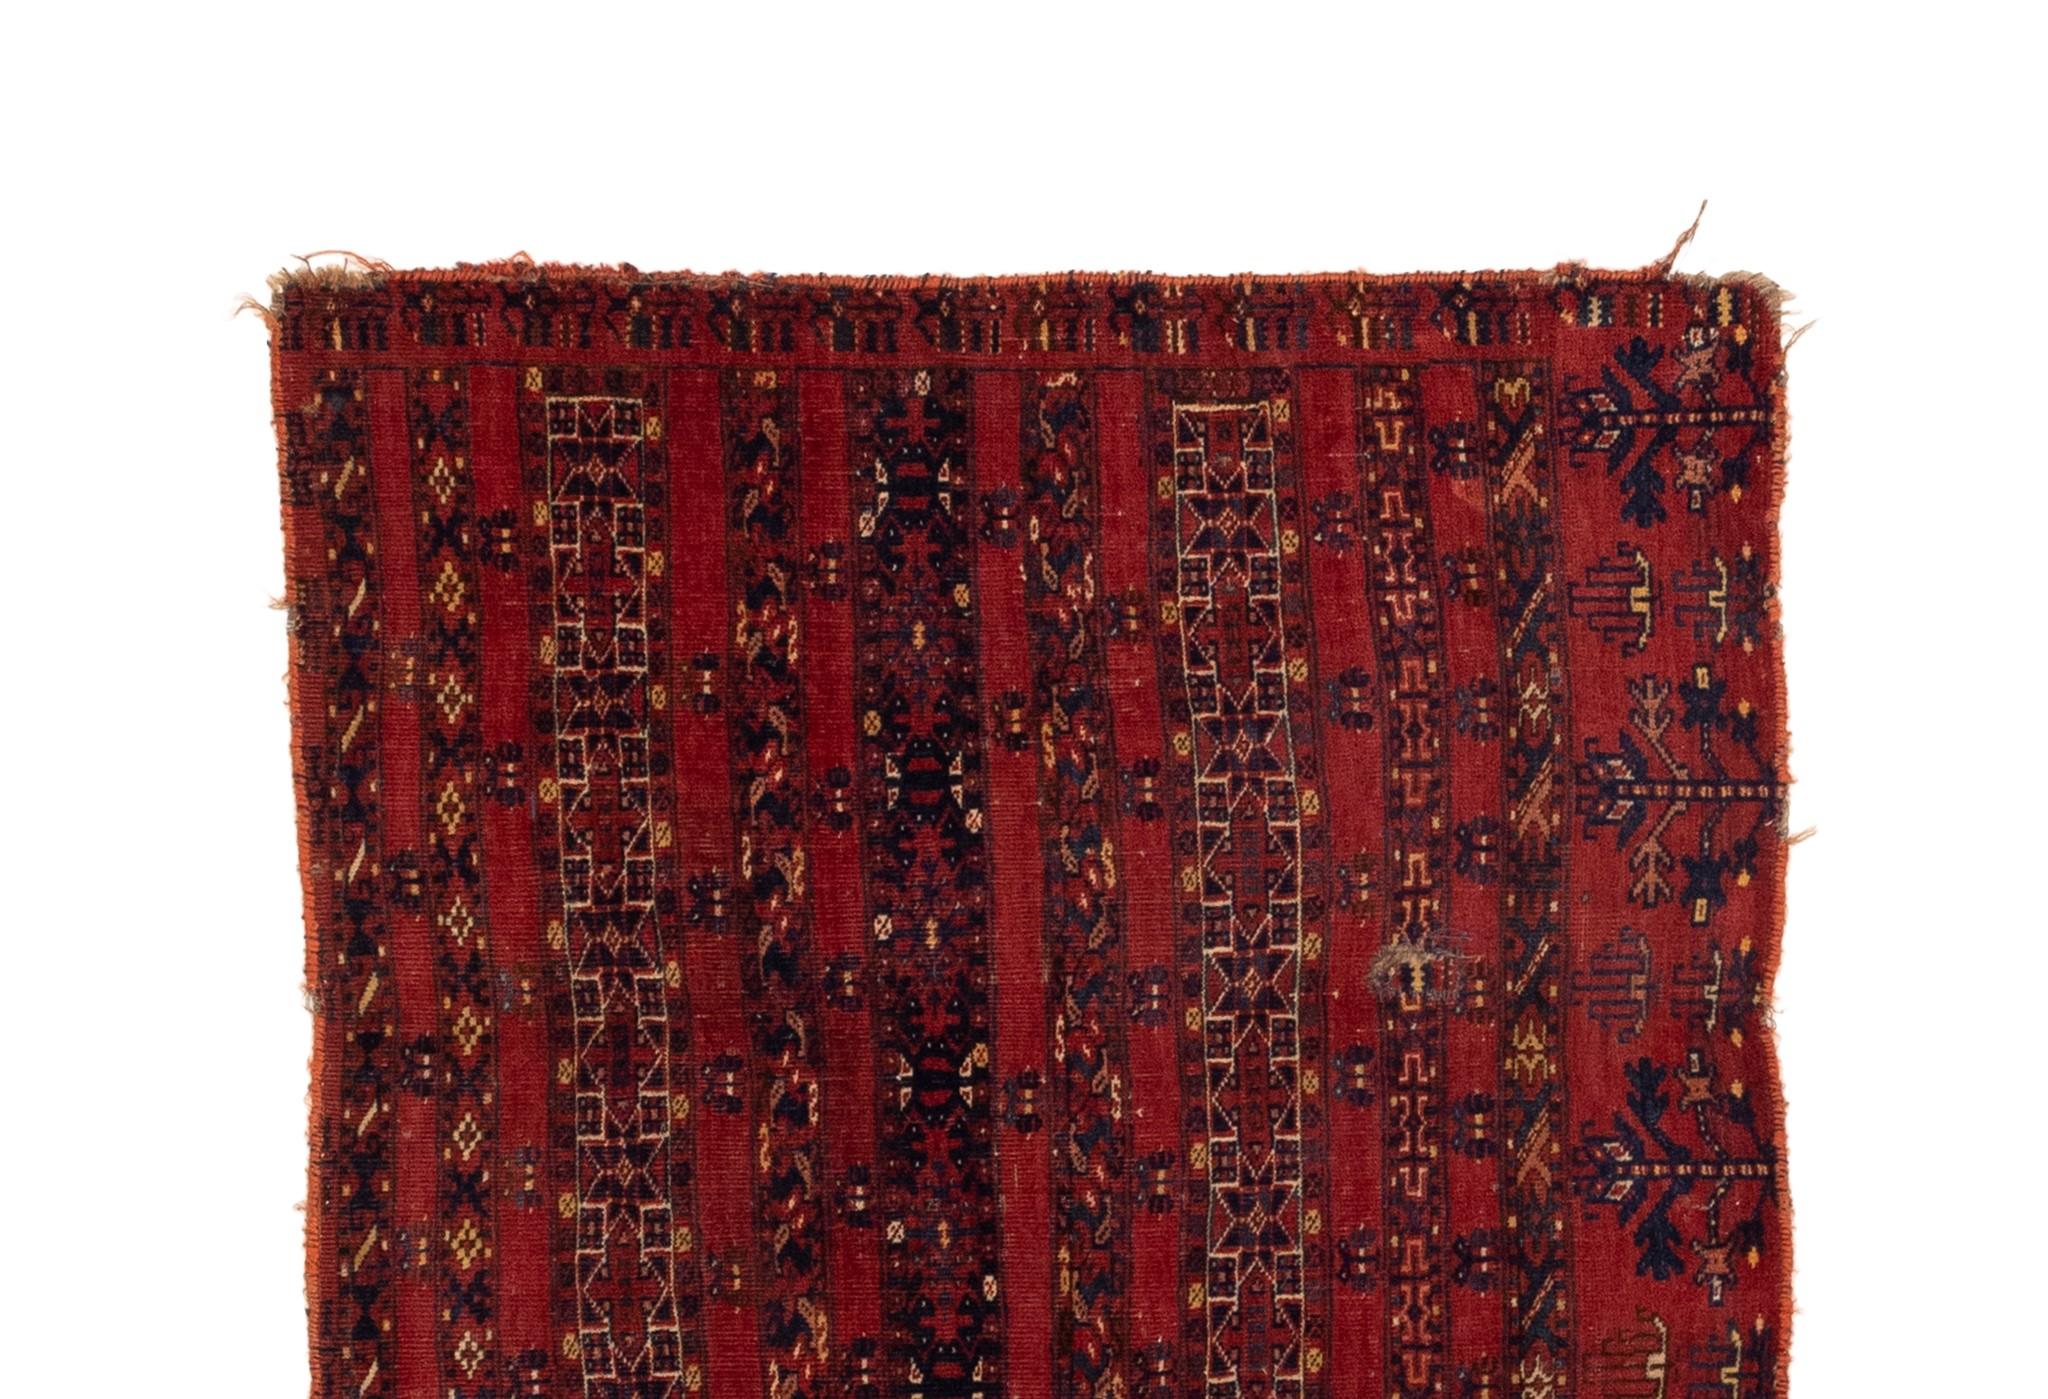 This Antique Turkaman Trival rug is a fine example of a piece that stands out for its rare element panels, vibrant red background color, and fine weave. The vintage rugs in our collection have a rich and deep color palette and feature characteristic